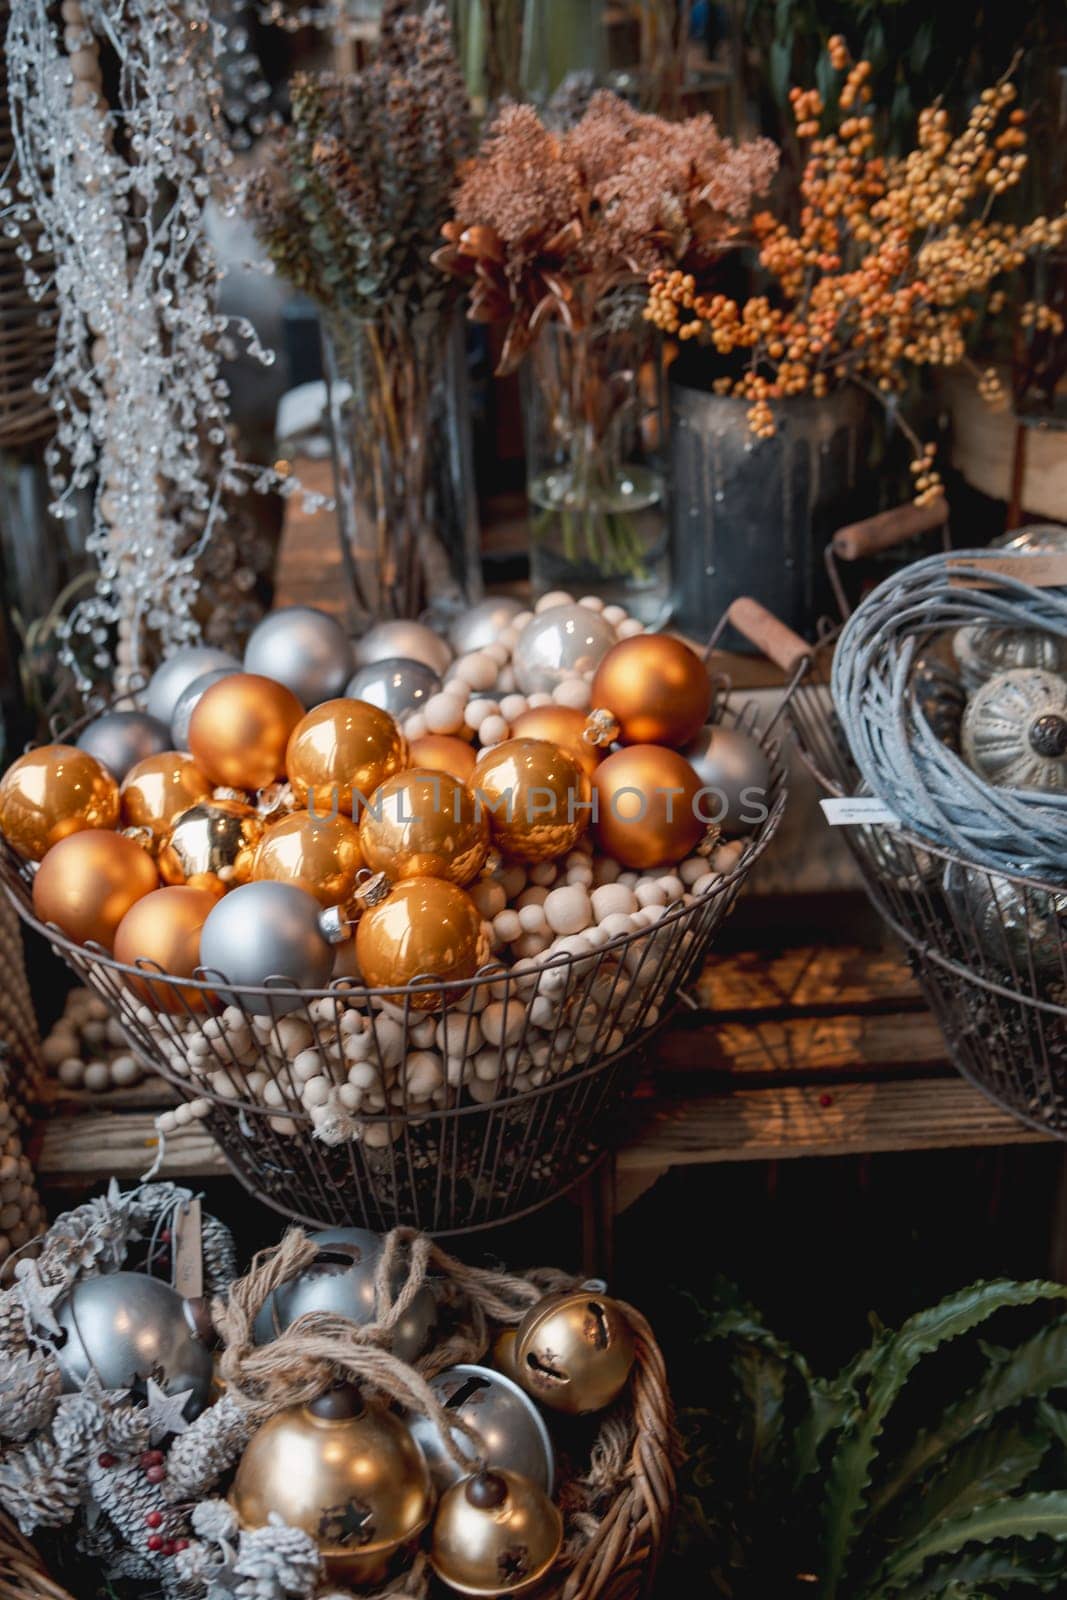 Festive and elegant New Year's decorations on the store's counter. by teksomolika